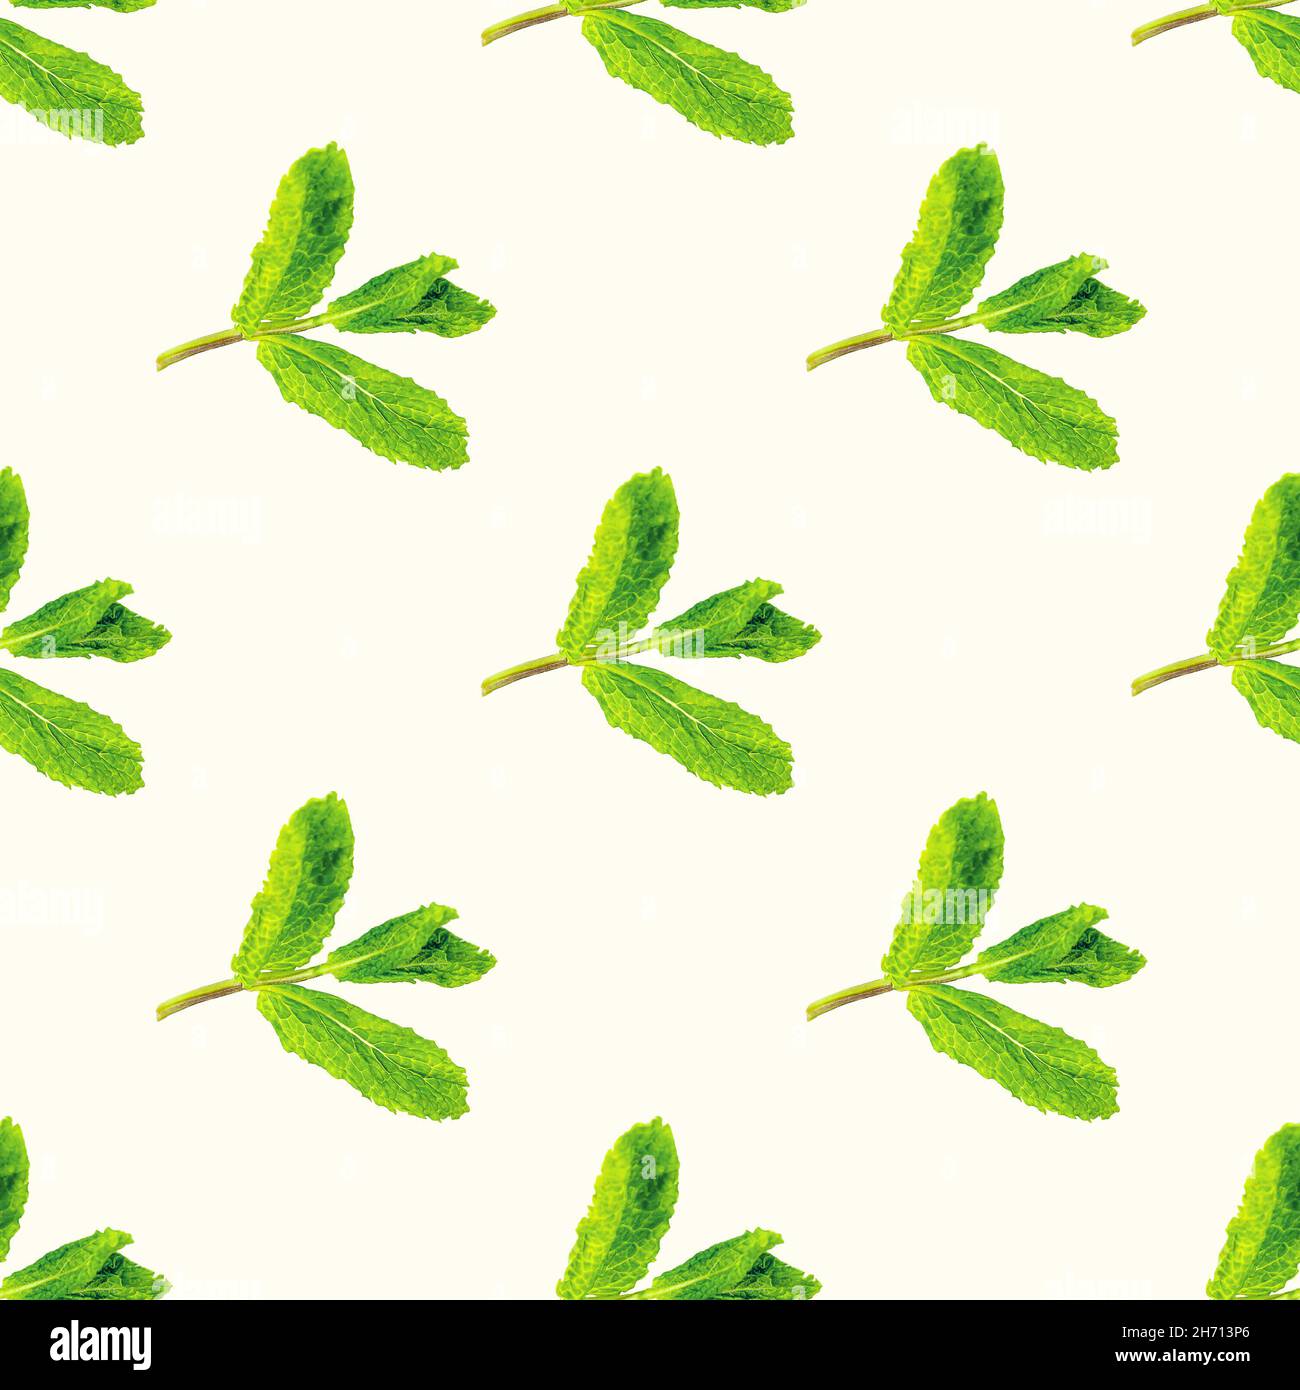 https://c8.alamy.com/comp/2H713P6/fresh-green-mint-peppermint-spearmint-branch-with-leaves-repeat-seamless-pattern-on-light-background-2H713P6.jpg